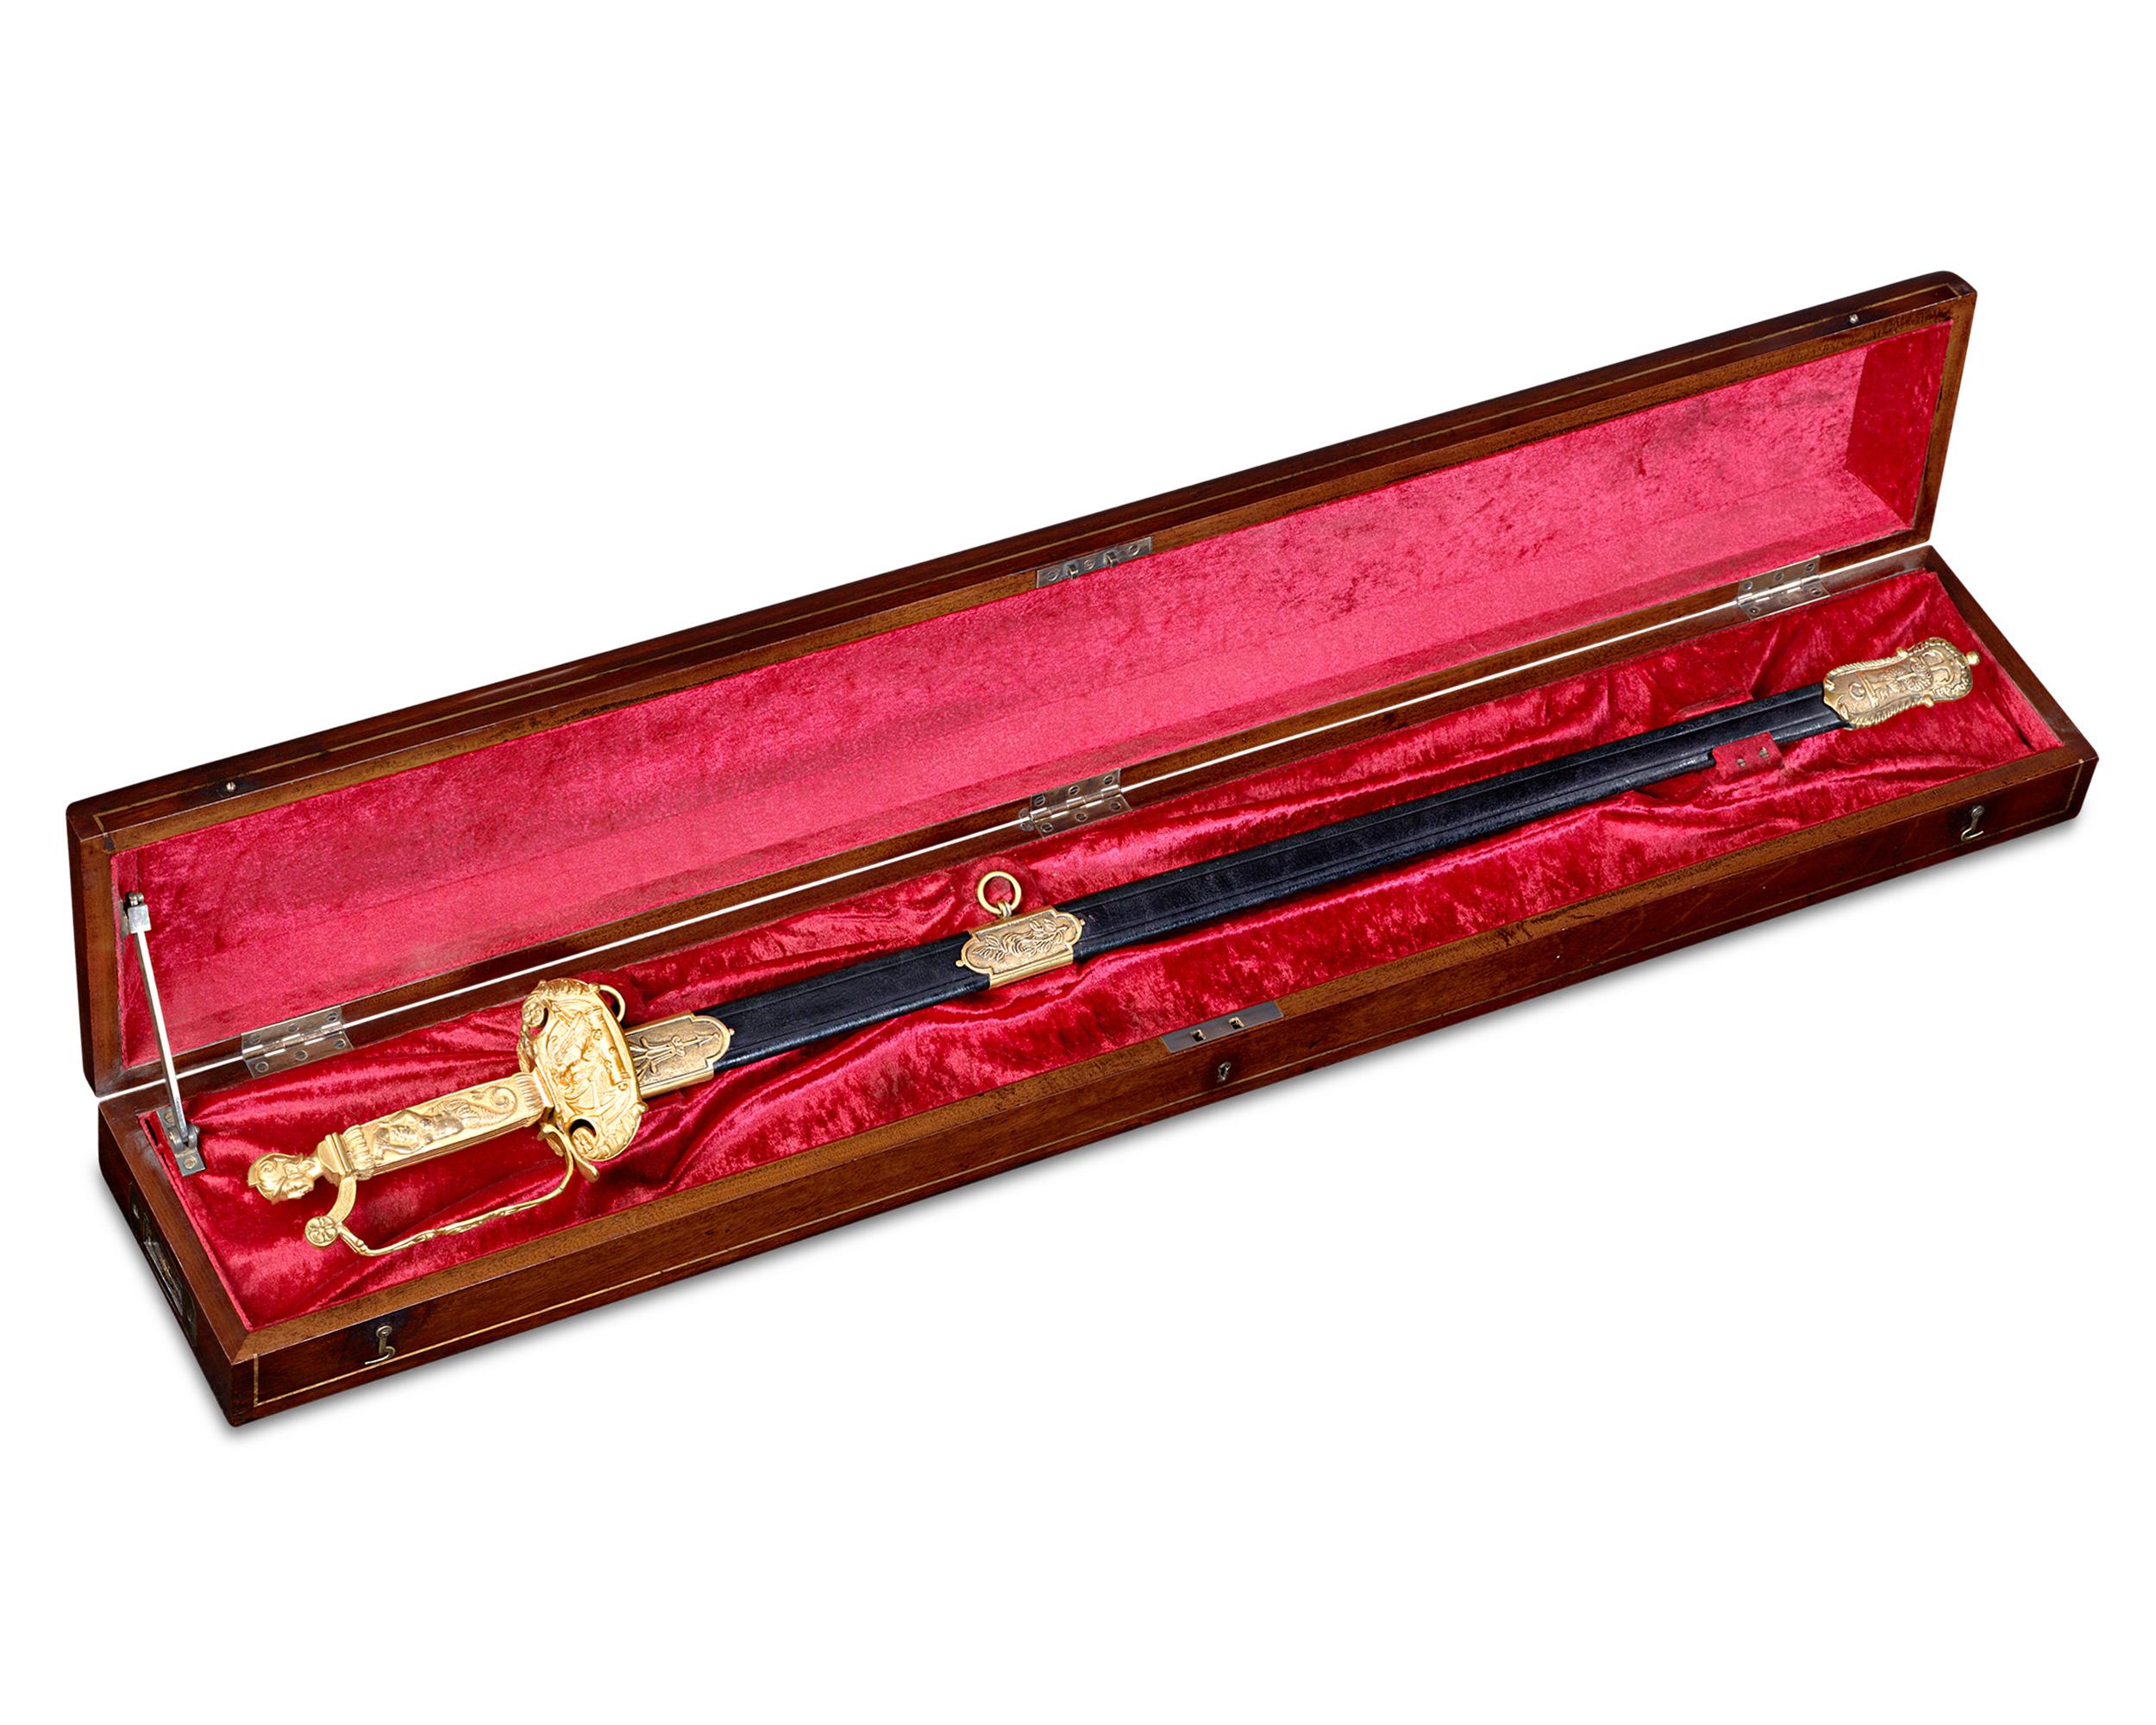 This rare and historic congressional sword was presented to Captain Daniel Hazard in 1820 to commemorate his extraordinary service in the Battle of Lake Champlain on September 11, 1814. Produced by Rose of Philadelphia and etched by John Meer, the